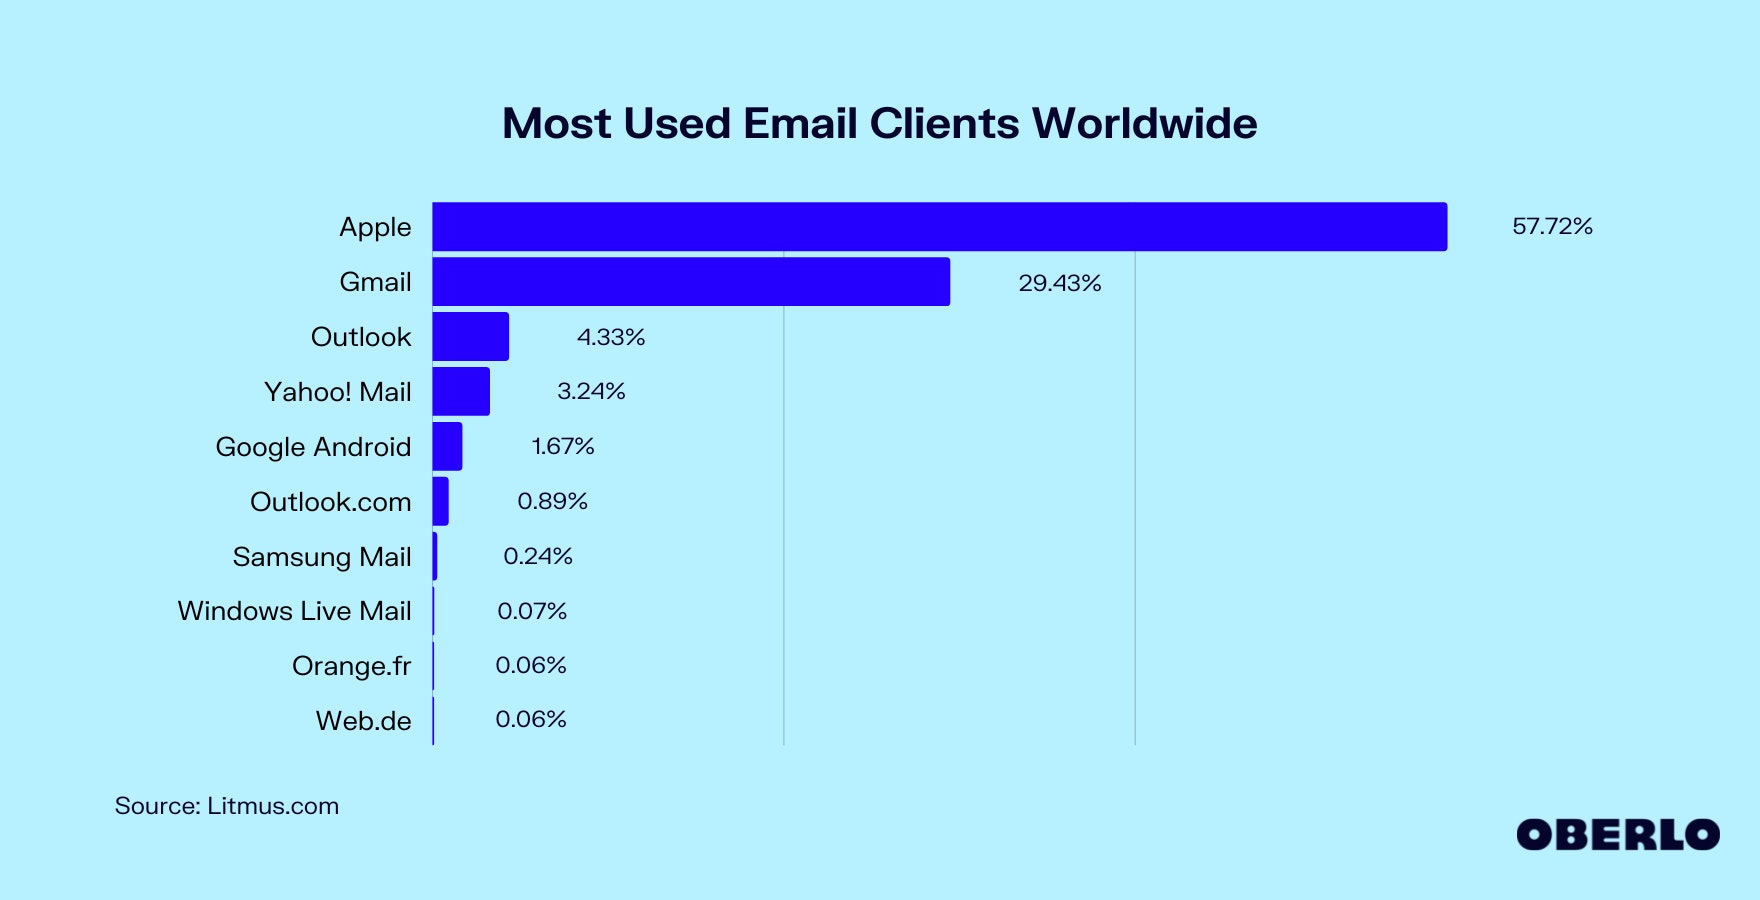 Chart of the Most Used Email Clients Worldwide